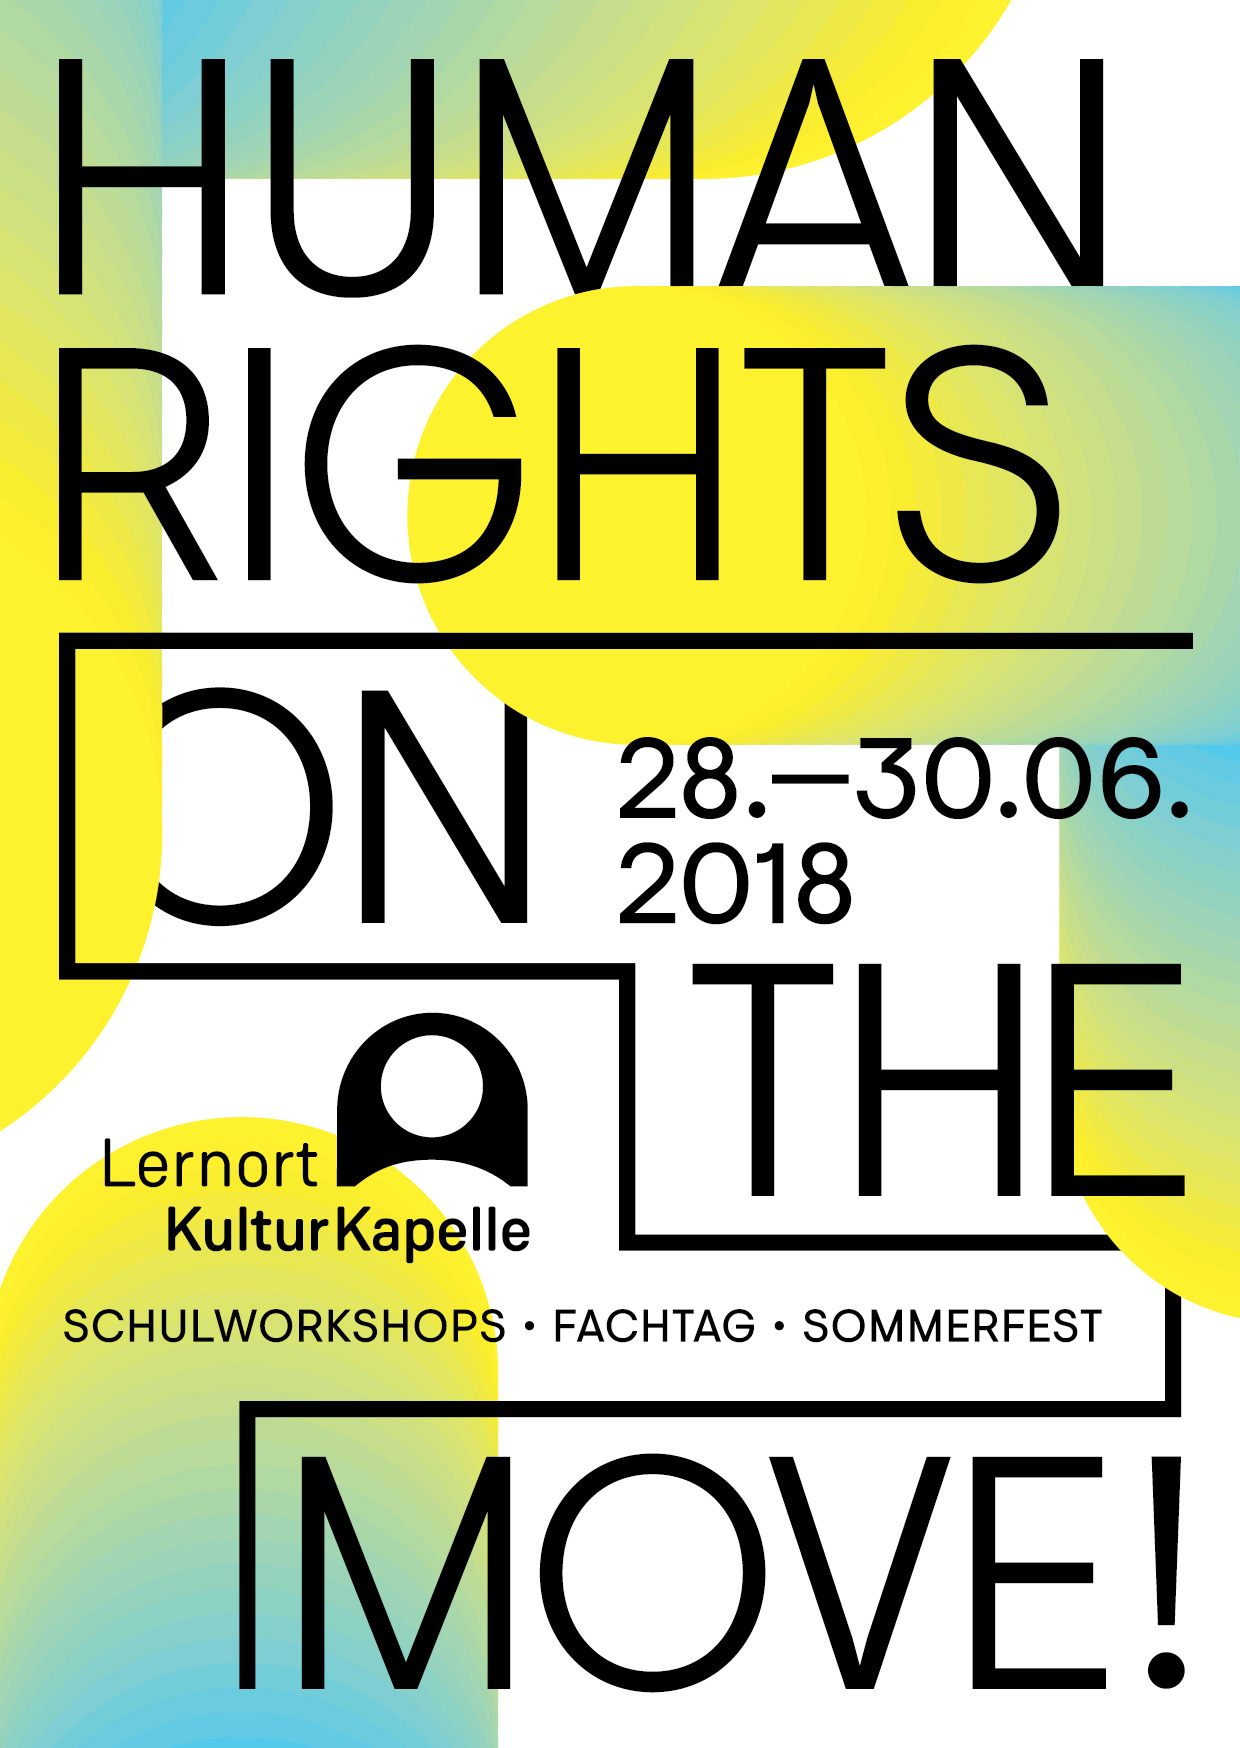 Menschenrechtsfestival "Human Rights on the Move!"